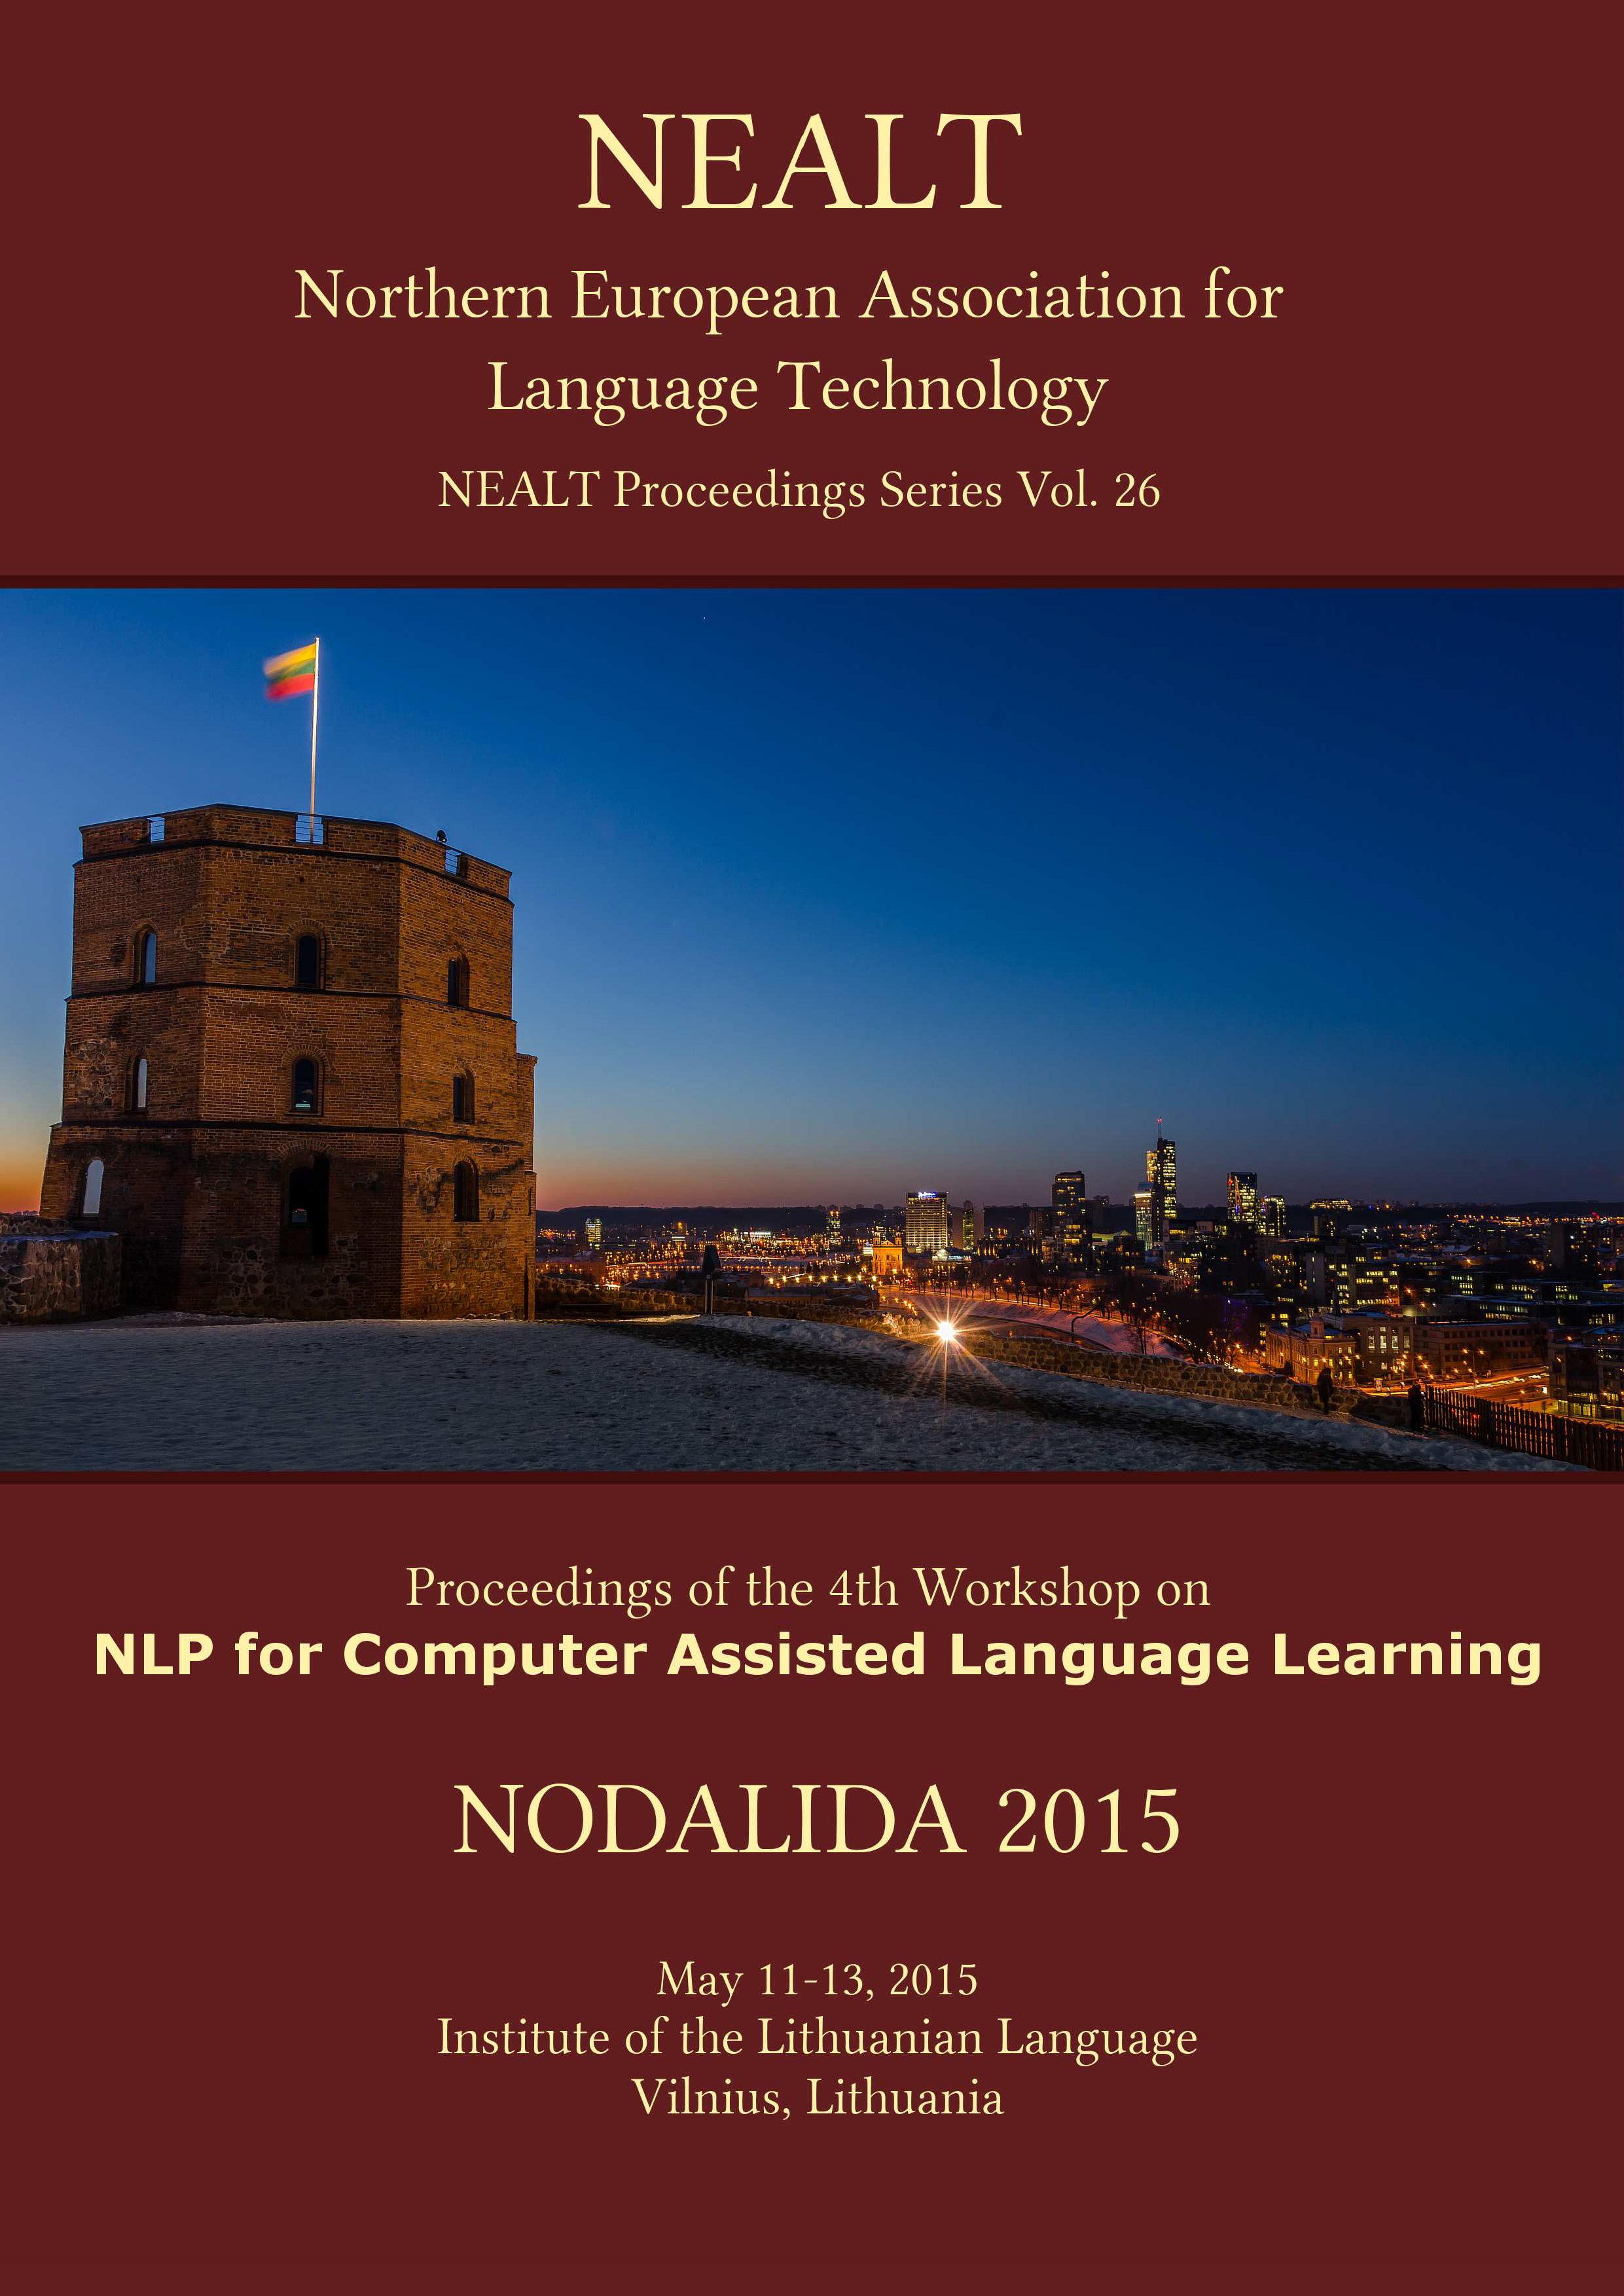 					View Proceedings of the 4th workshop on NLP for Computer Assisted Language Learning at NODALIDA 2015, Vilnius, 11th May, 2015
				